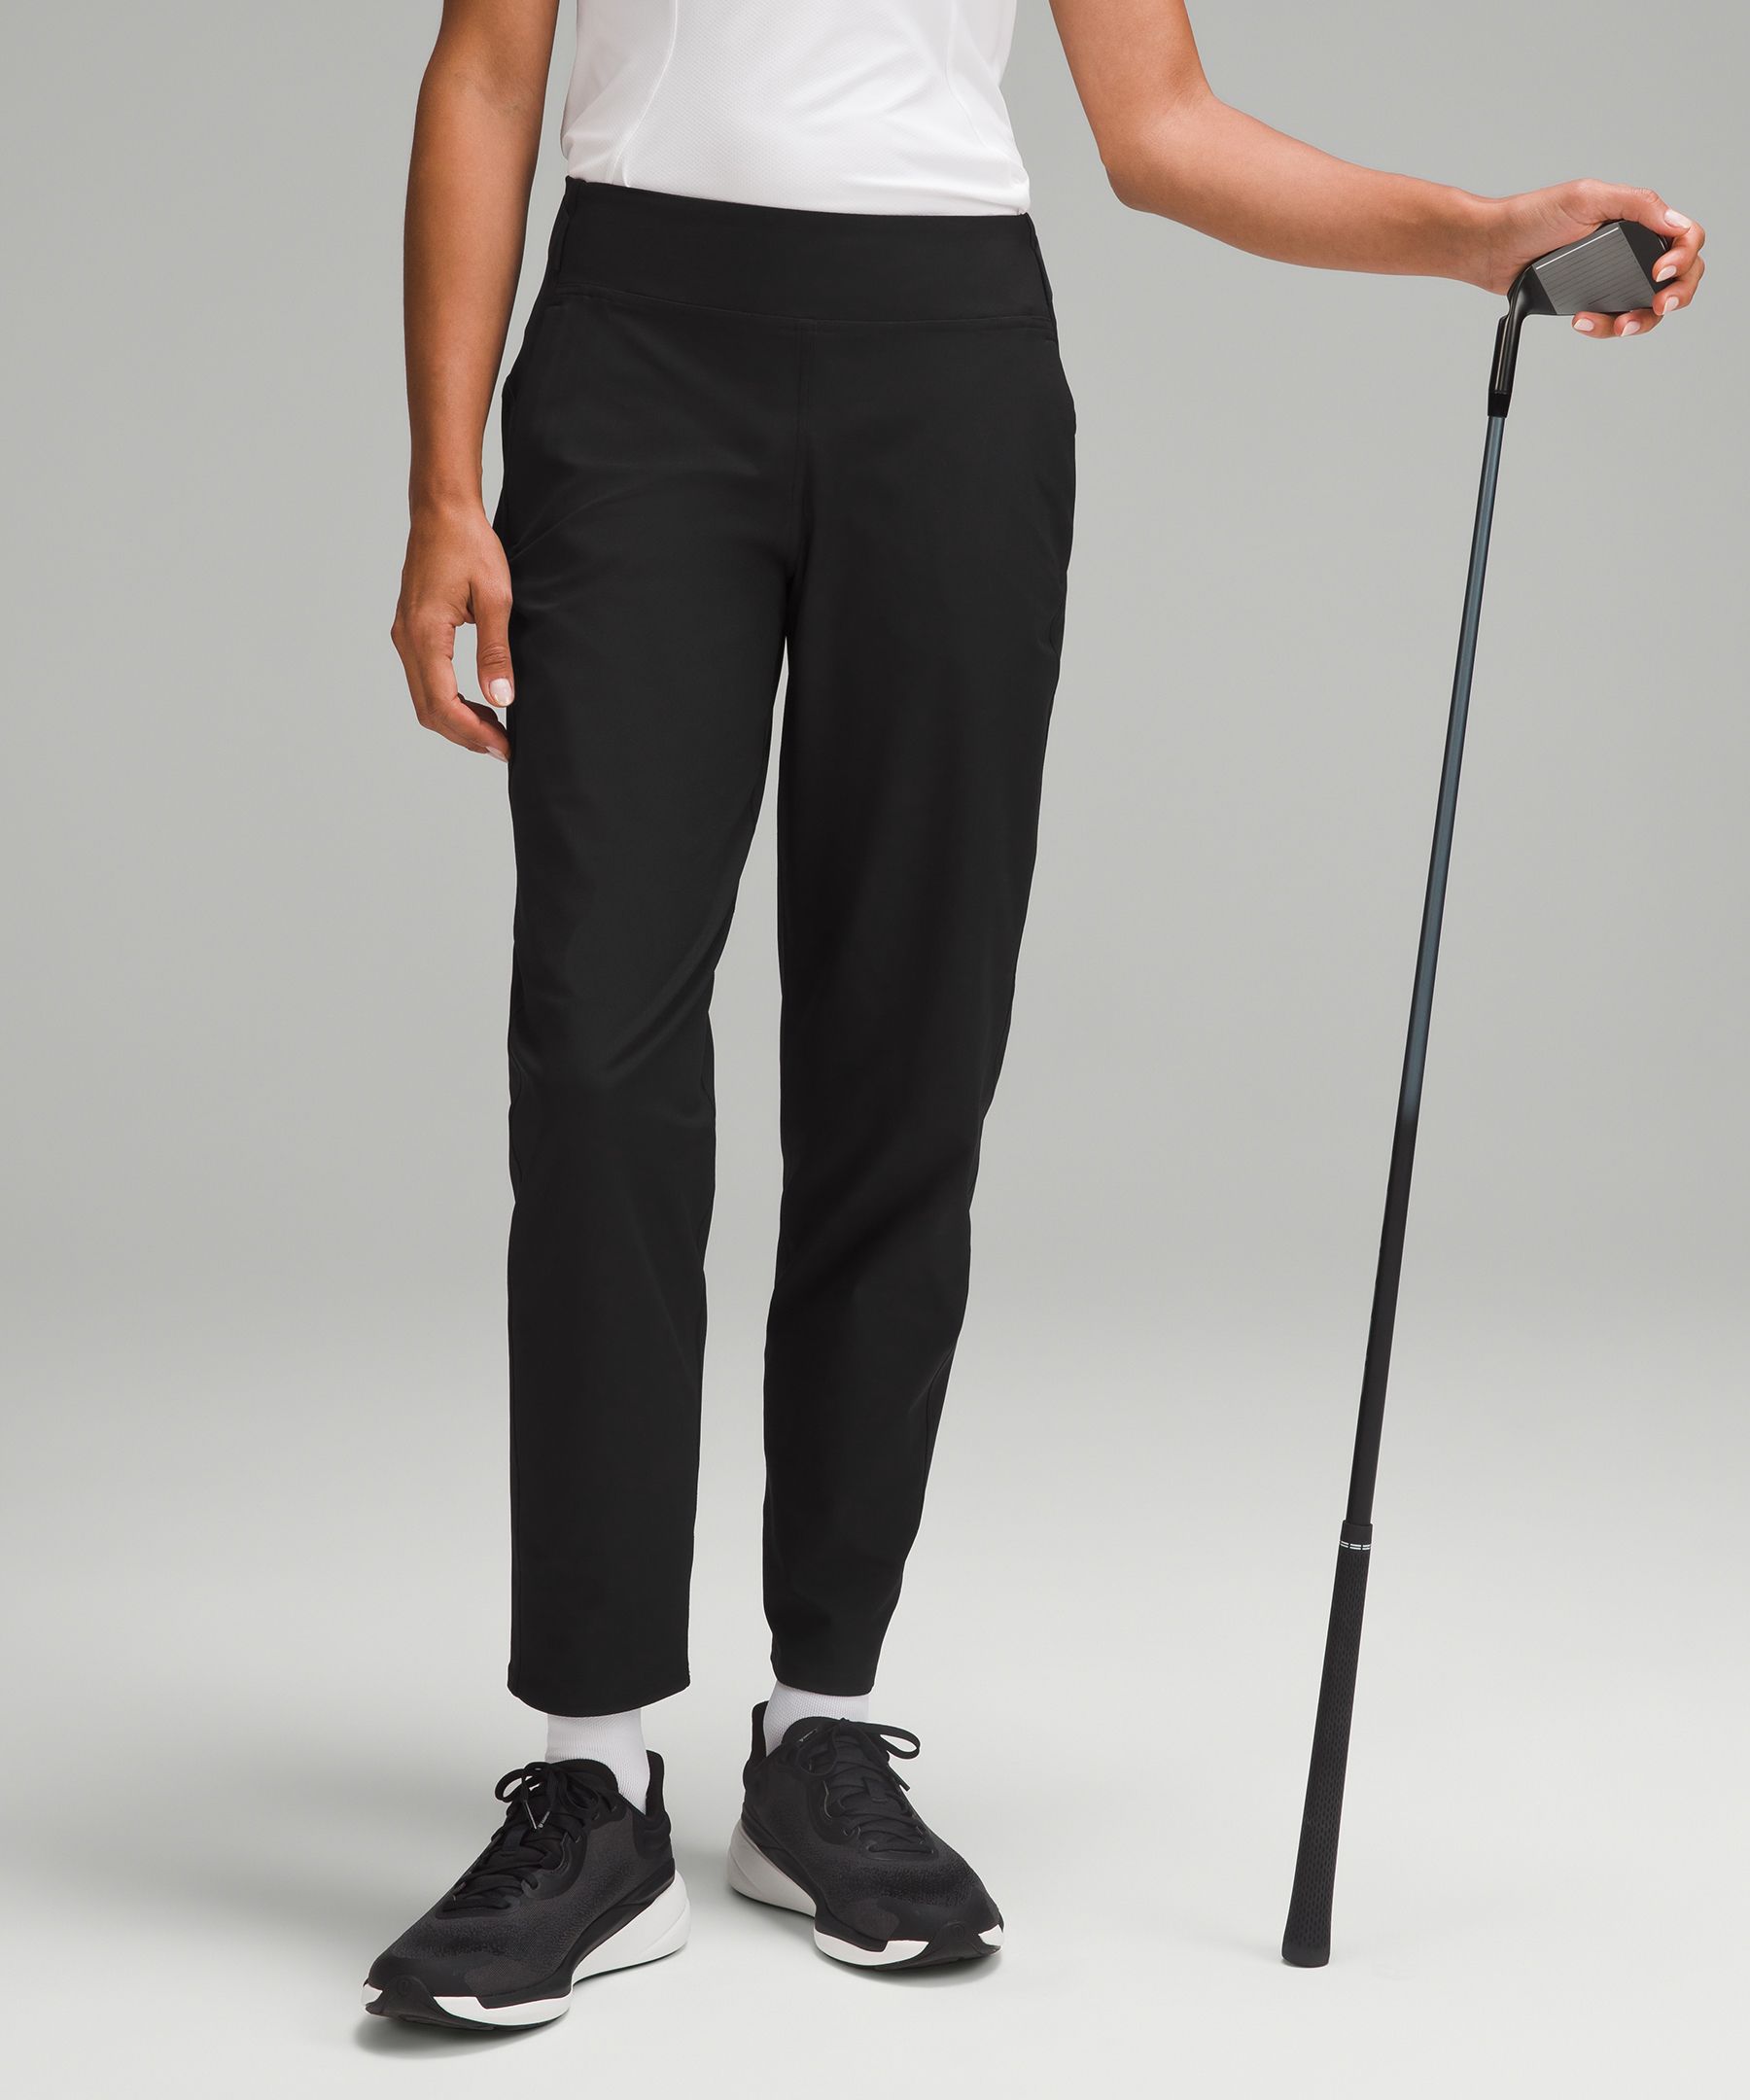 Save $67 On The Lululemon Golf Pants Today In This Mid-Summer Sale